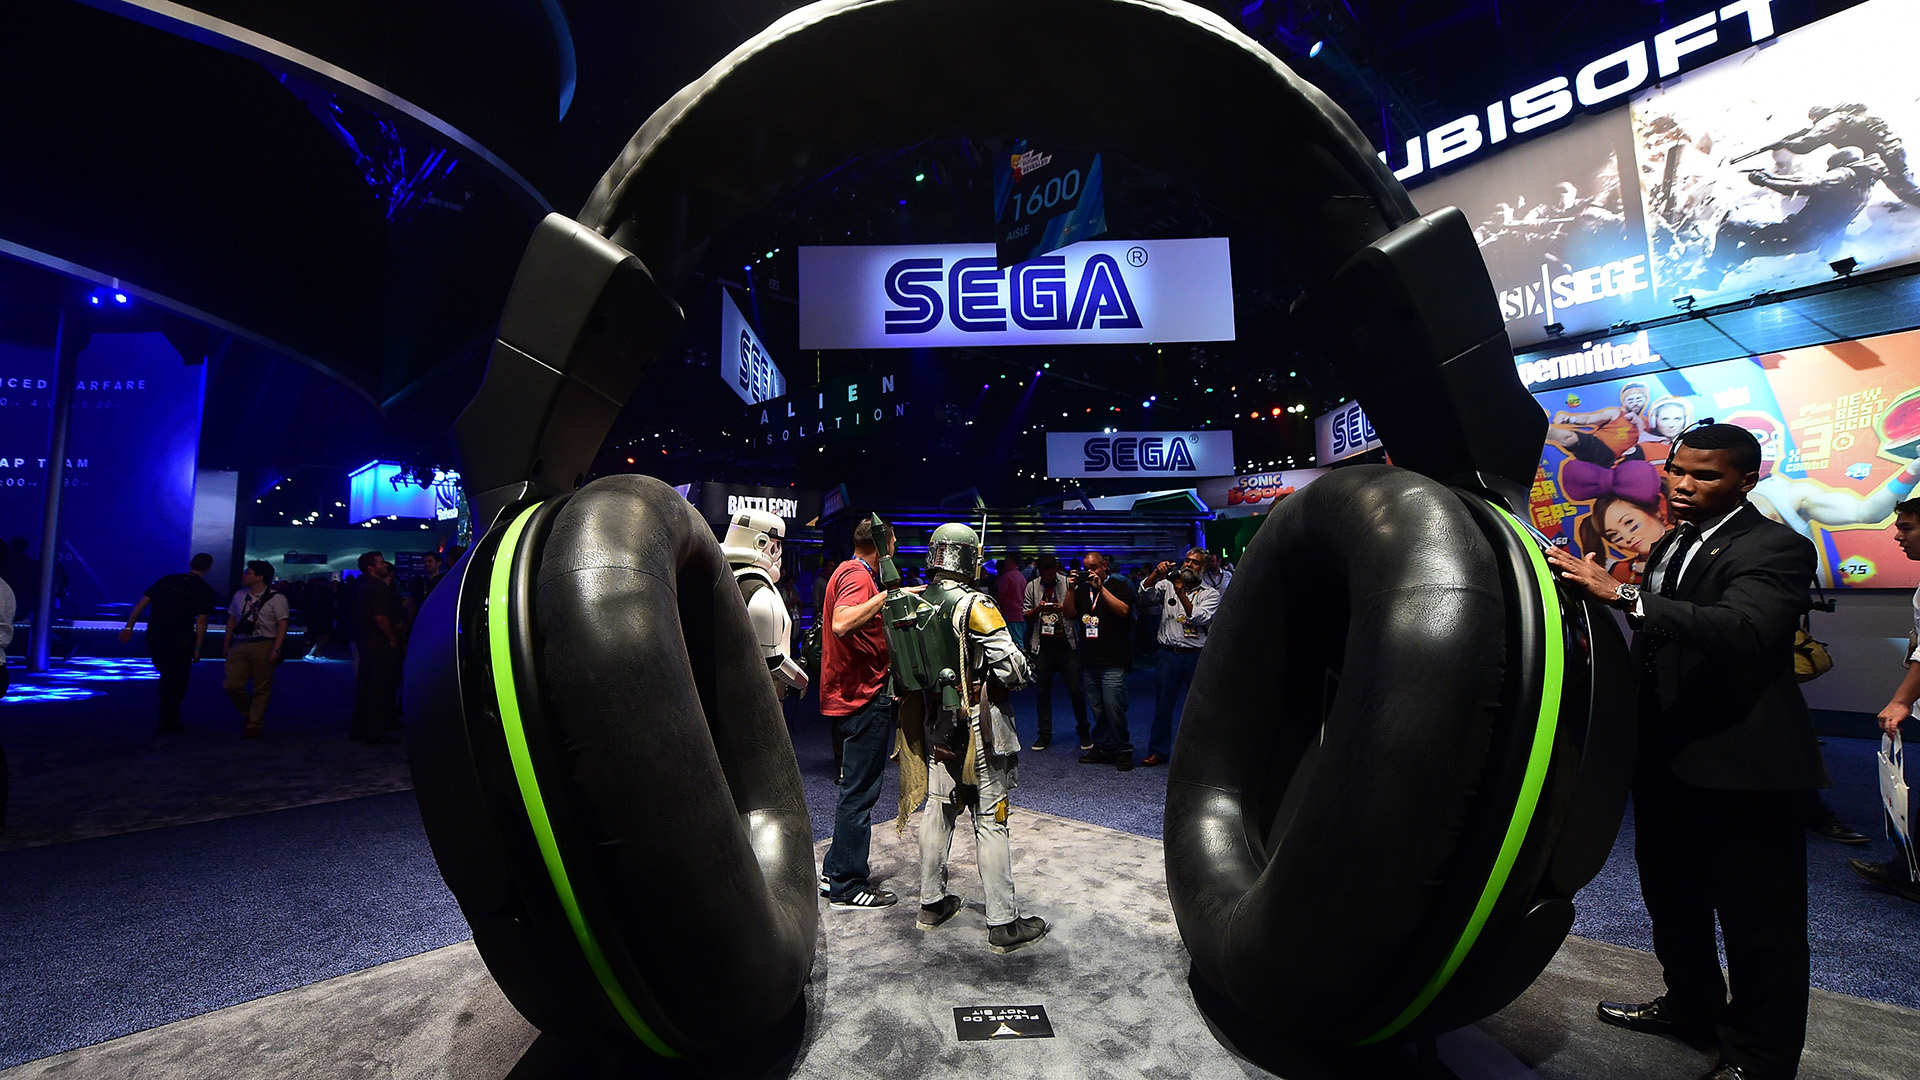 A Turtle Beach headset display attracts a man's attention on day two at the annual E3 video game extravaganza in Los Angeles, California on June 11, 2014